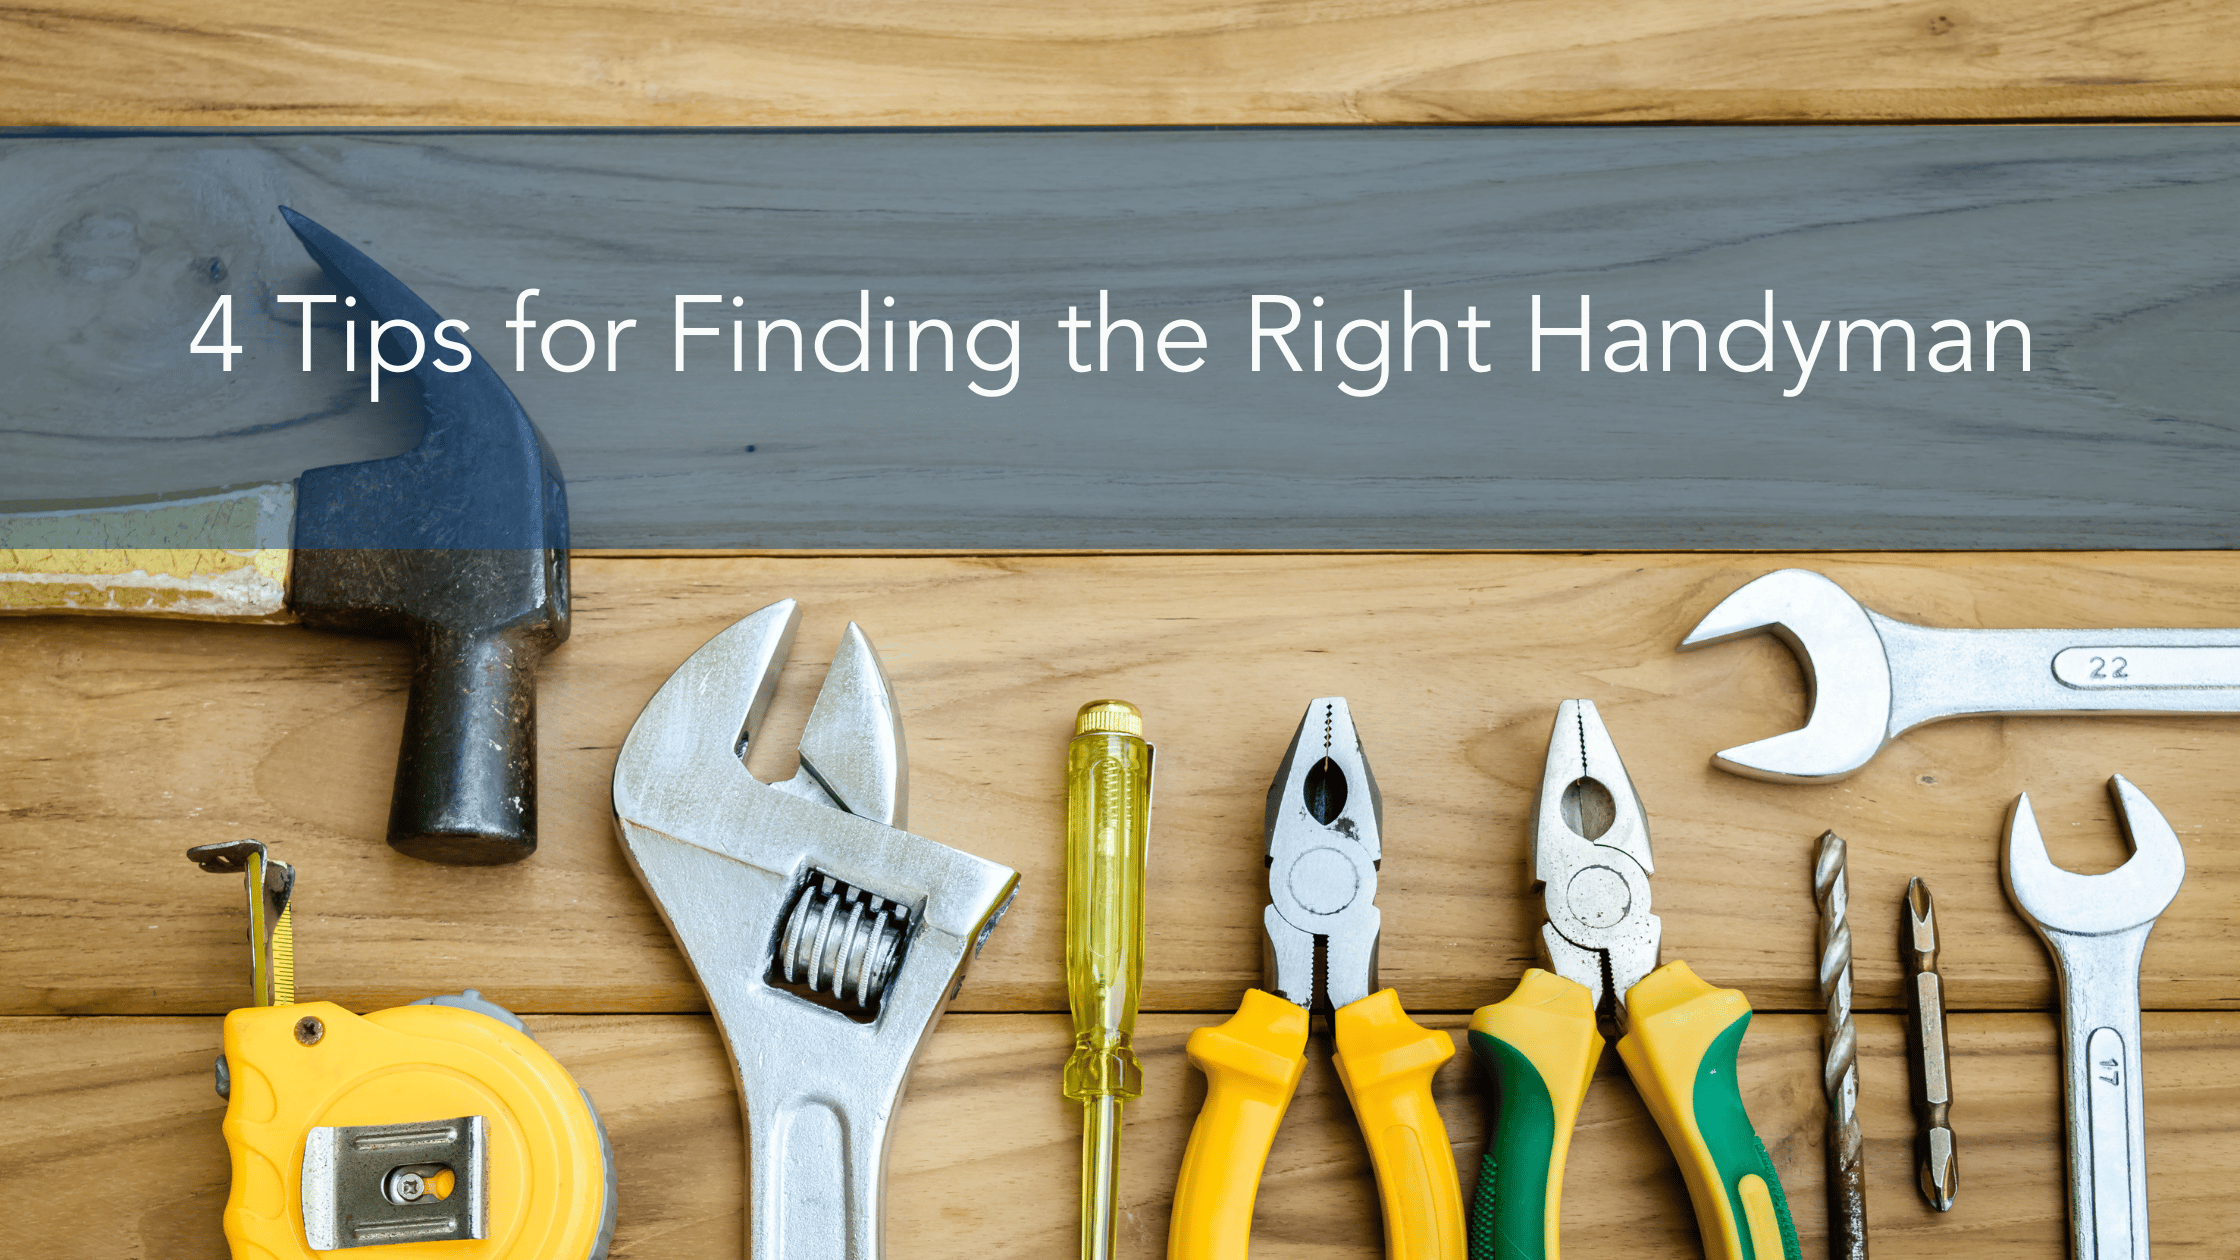 https://handymanconnection.com/wp-content/uploads/2023/02/4-Tips-for-Finding-the-Right-Handyman.png